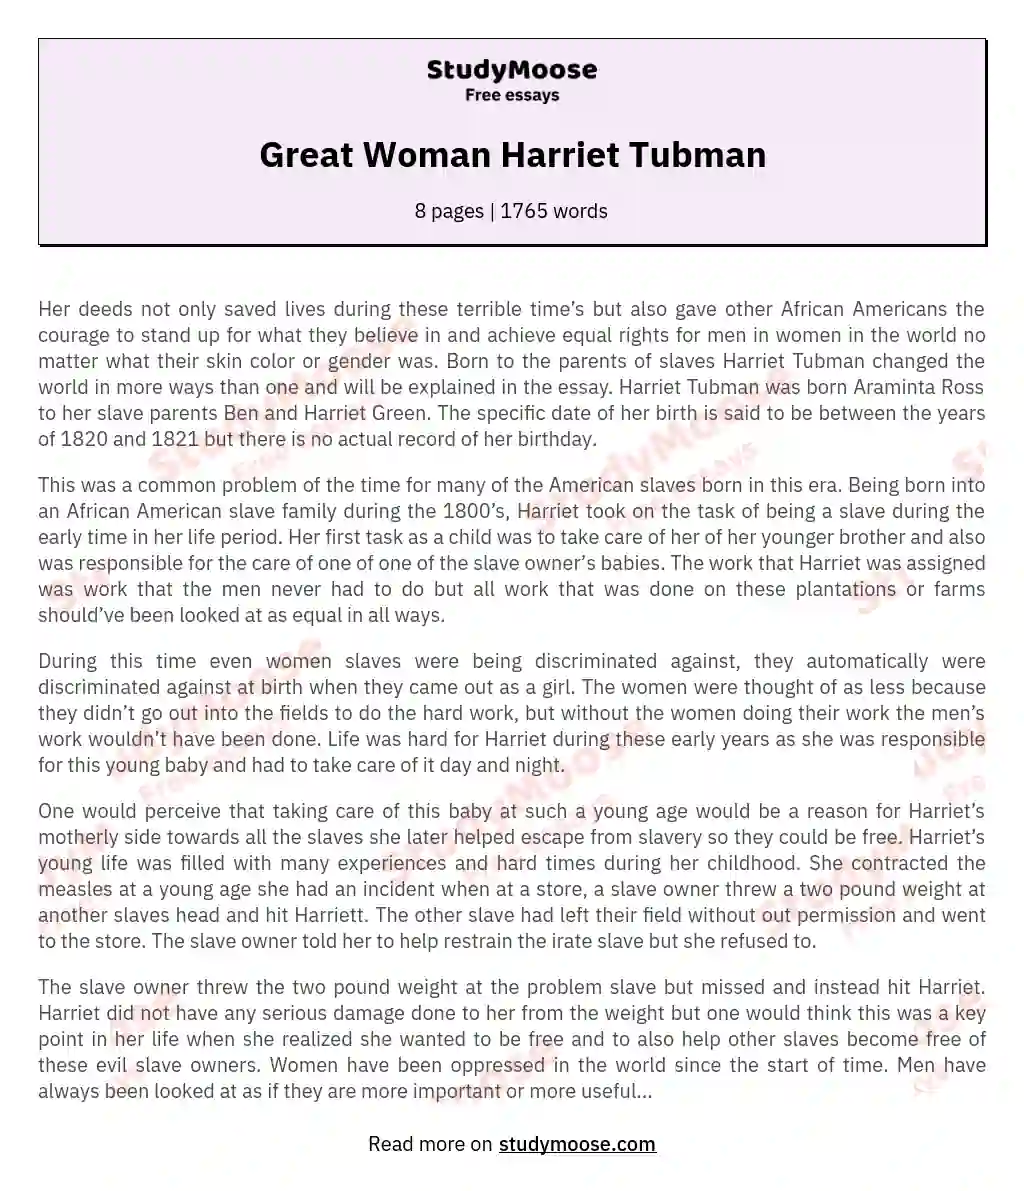 Harriet Tubman: A Champion for Freedom and Equality essay